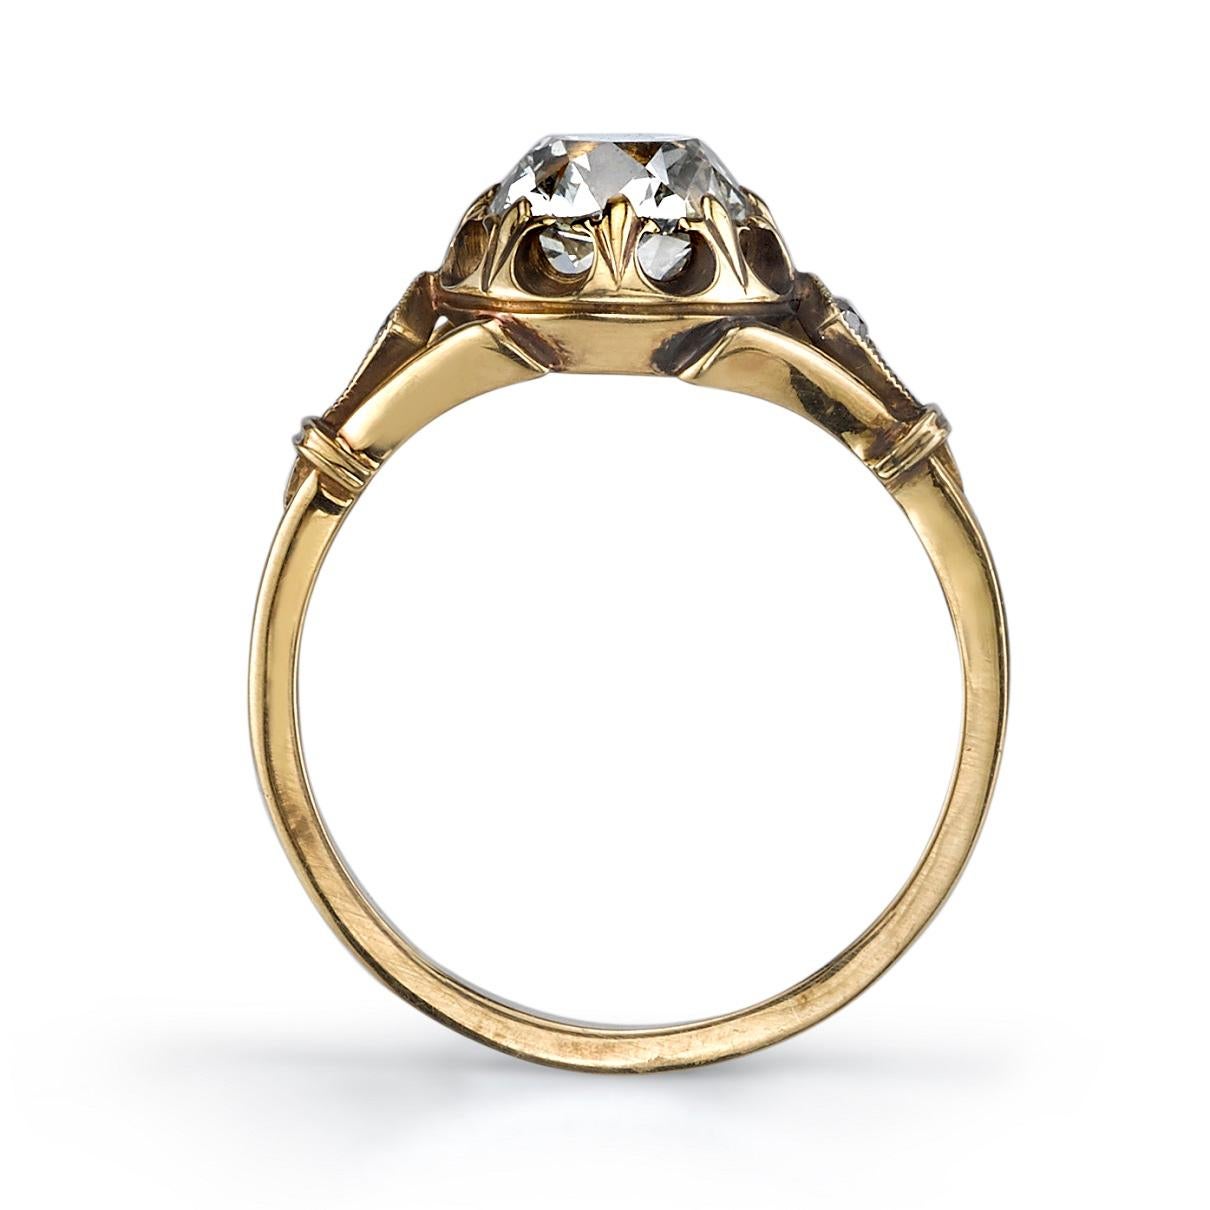 1.07ct L/SI1 EGL certified antique cushion cut diamond with 0.06ctw old European cut accent diamonds set in a handcrafted oxidized 18K yellow gold mounting.